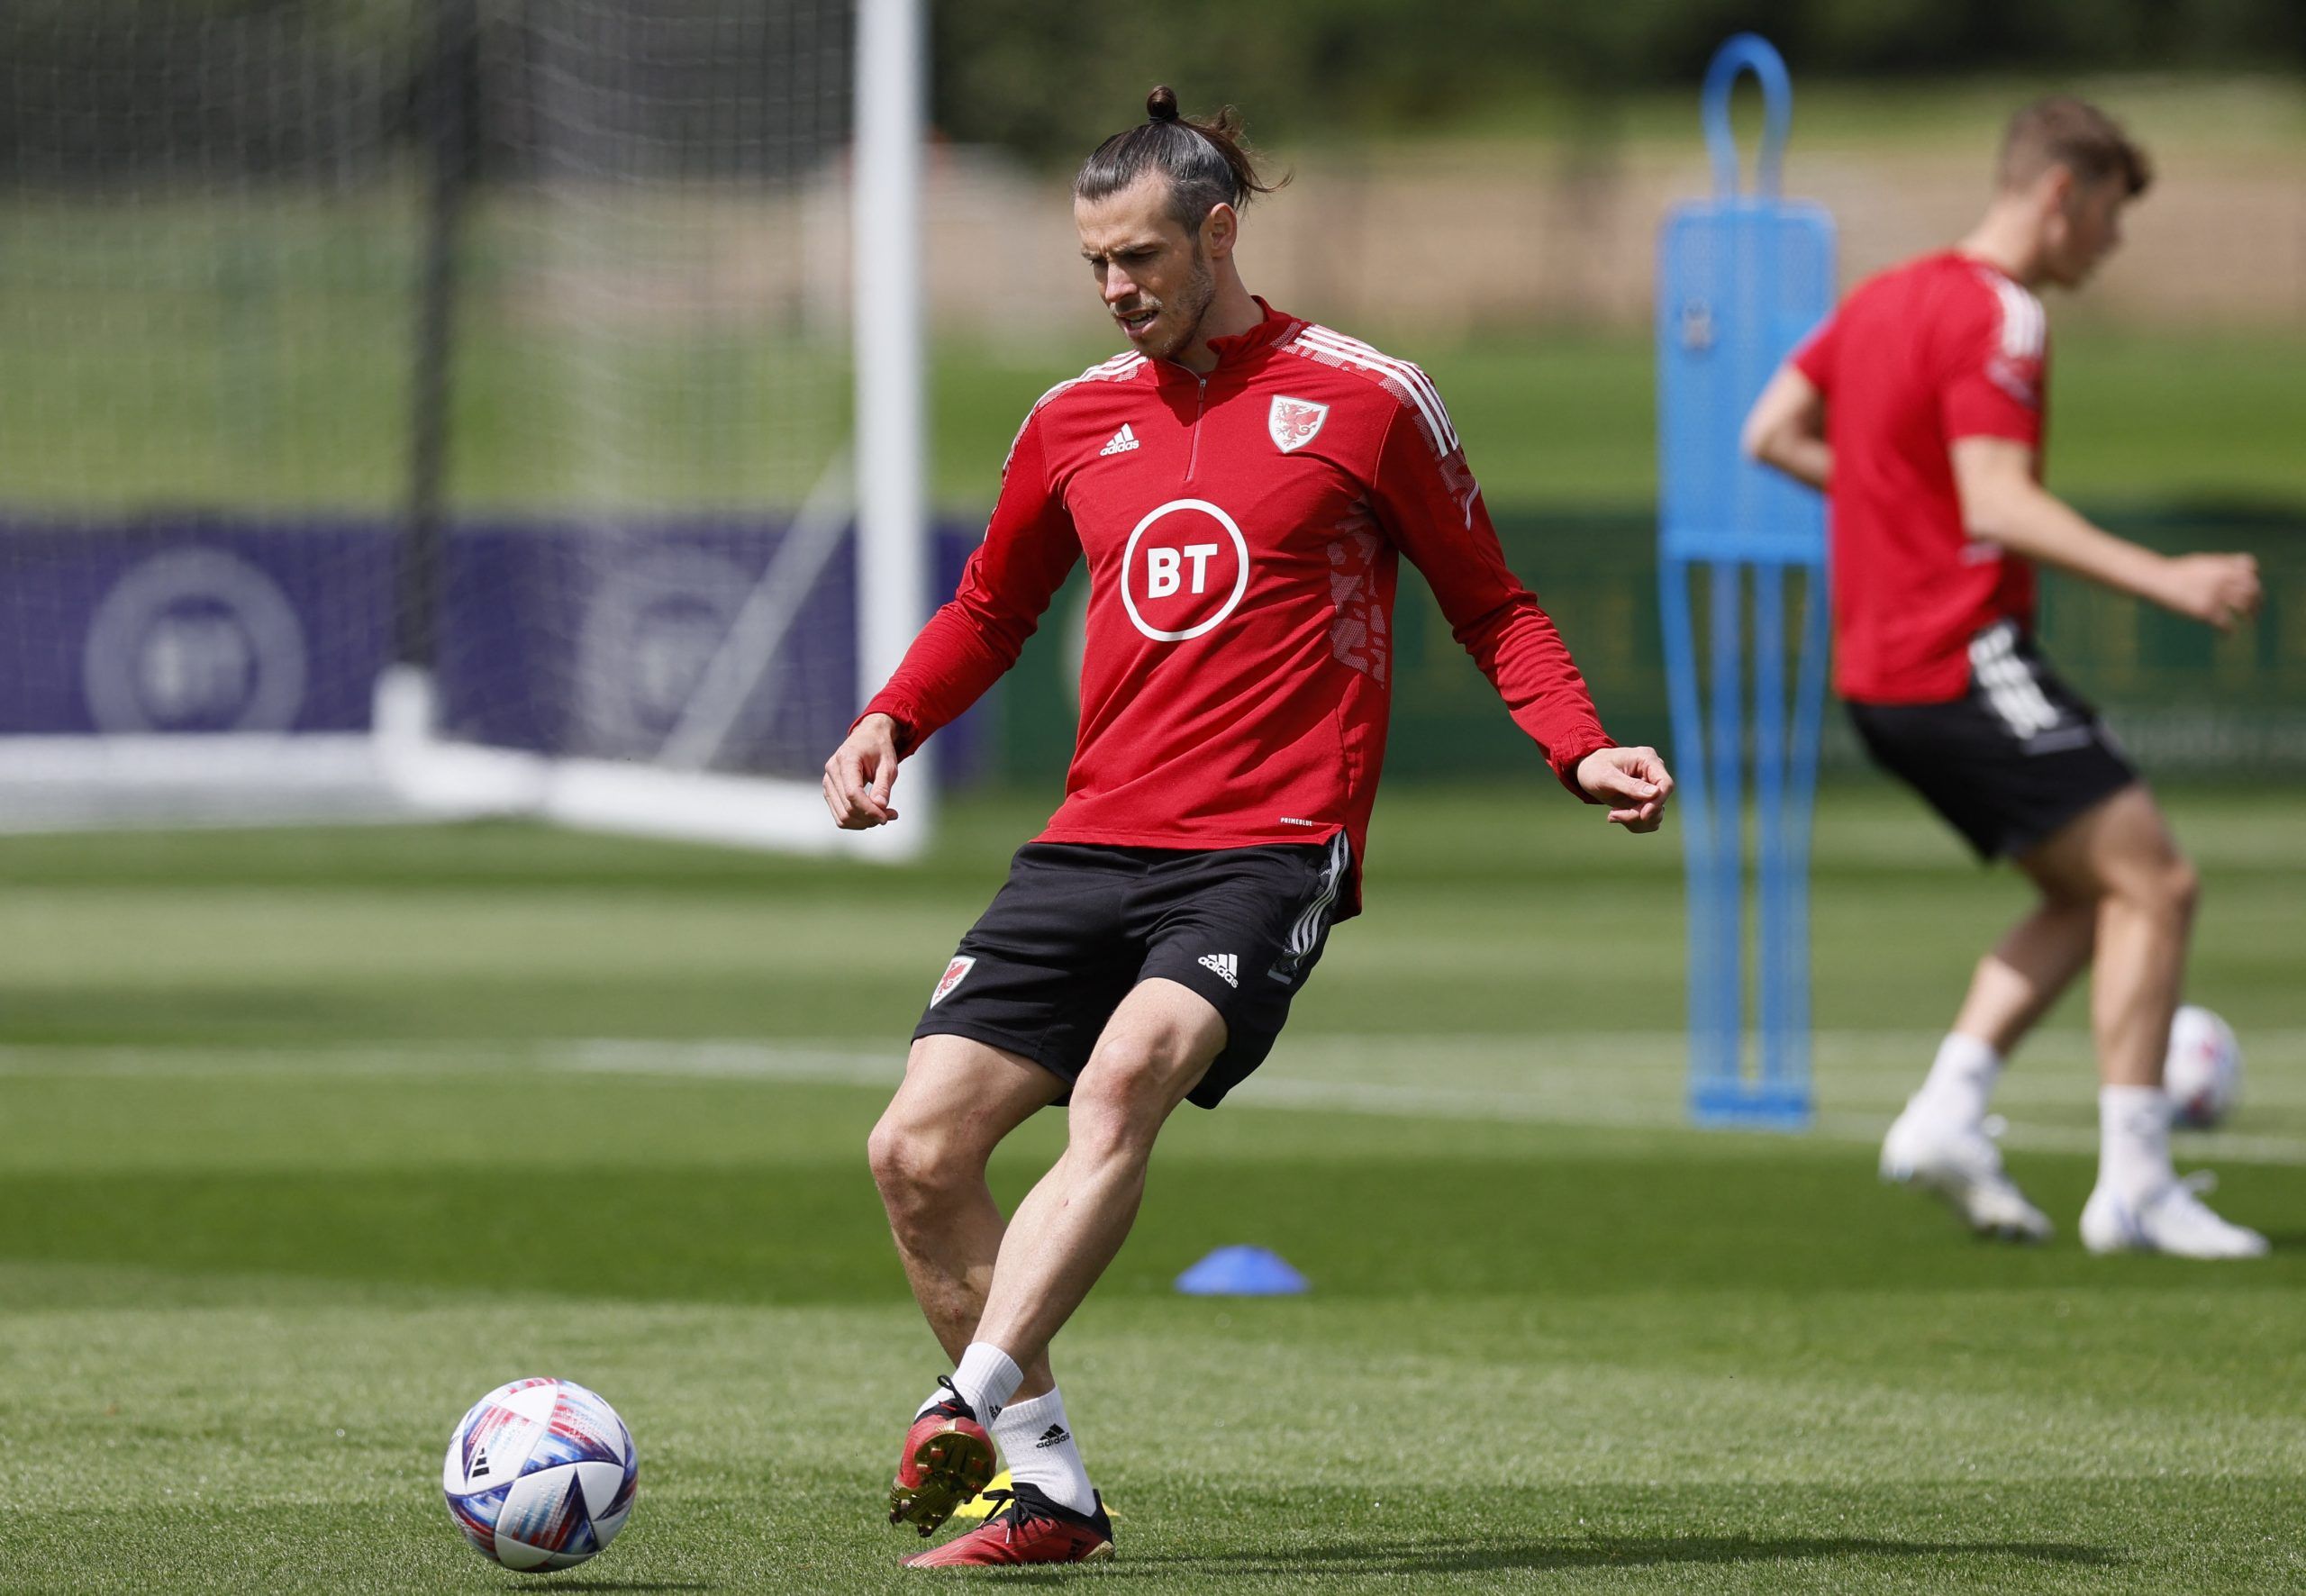 gareth-bale-wales-real-madrid-aston-villa-transfer-news-steven-gerrard-latest-agbonlahor-update-villa-news-latest-summer-transfer-windowSoccer Football - UEFA Nations League - Wales Training - The Vale Resort, Hensol, Wales, Britain - June 10, 2022 Wales' Gareth Bale during training Action Images via Reuters/Andrew Couldridge